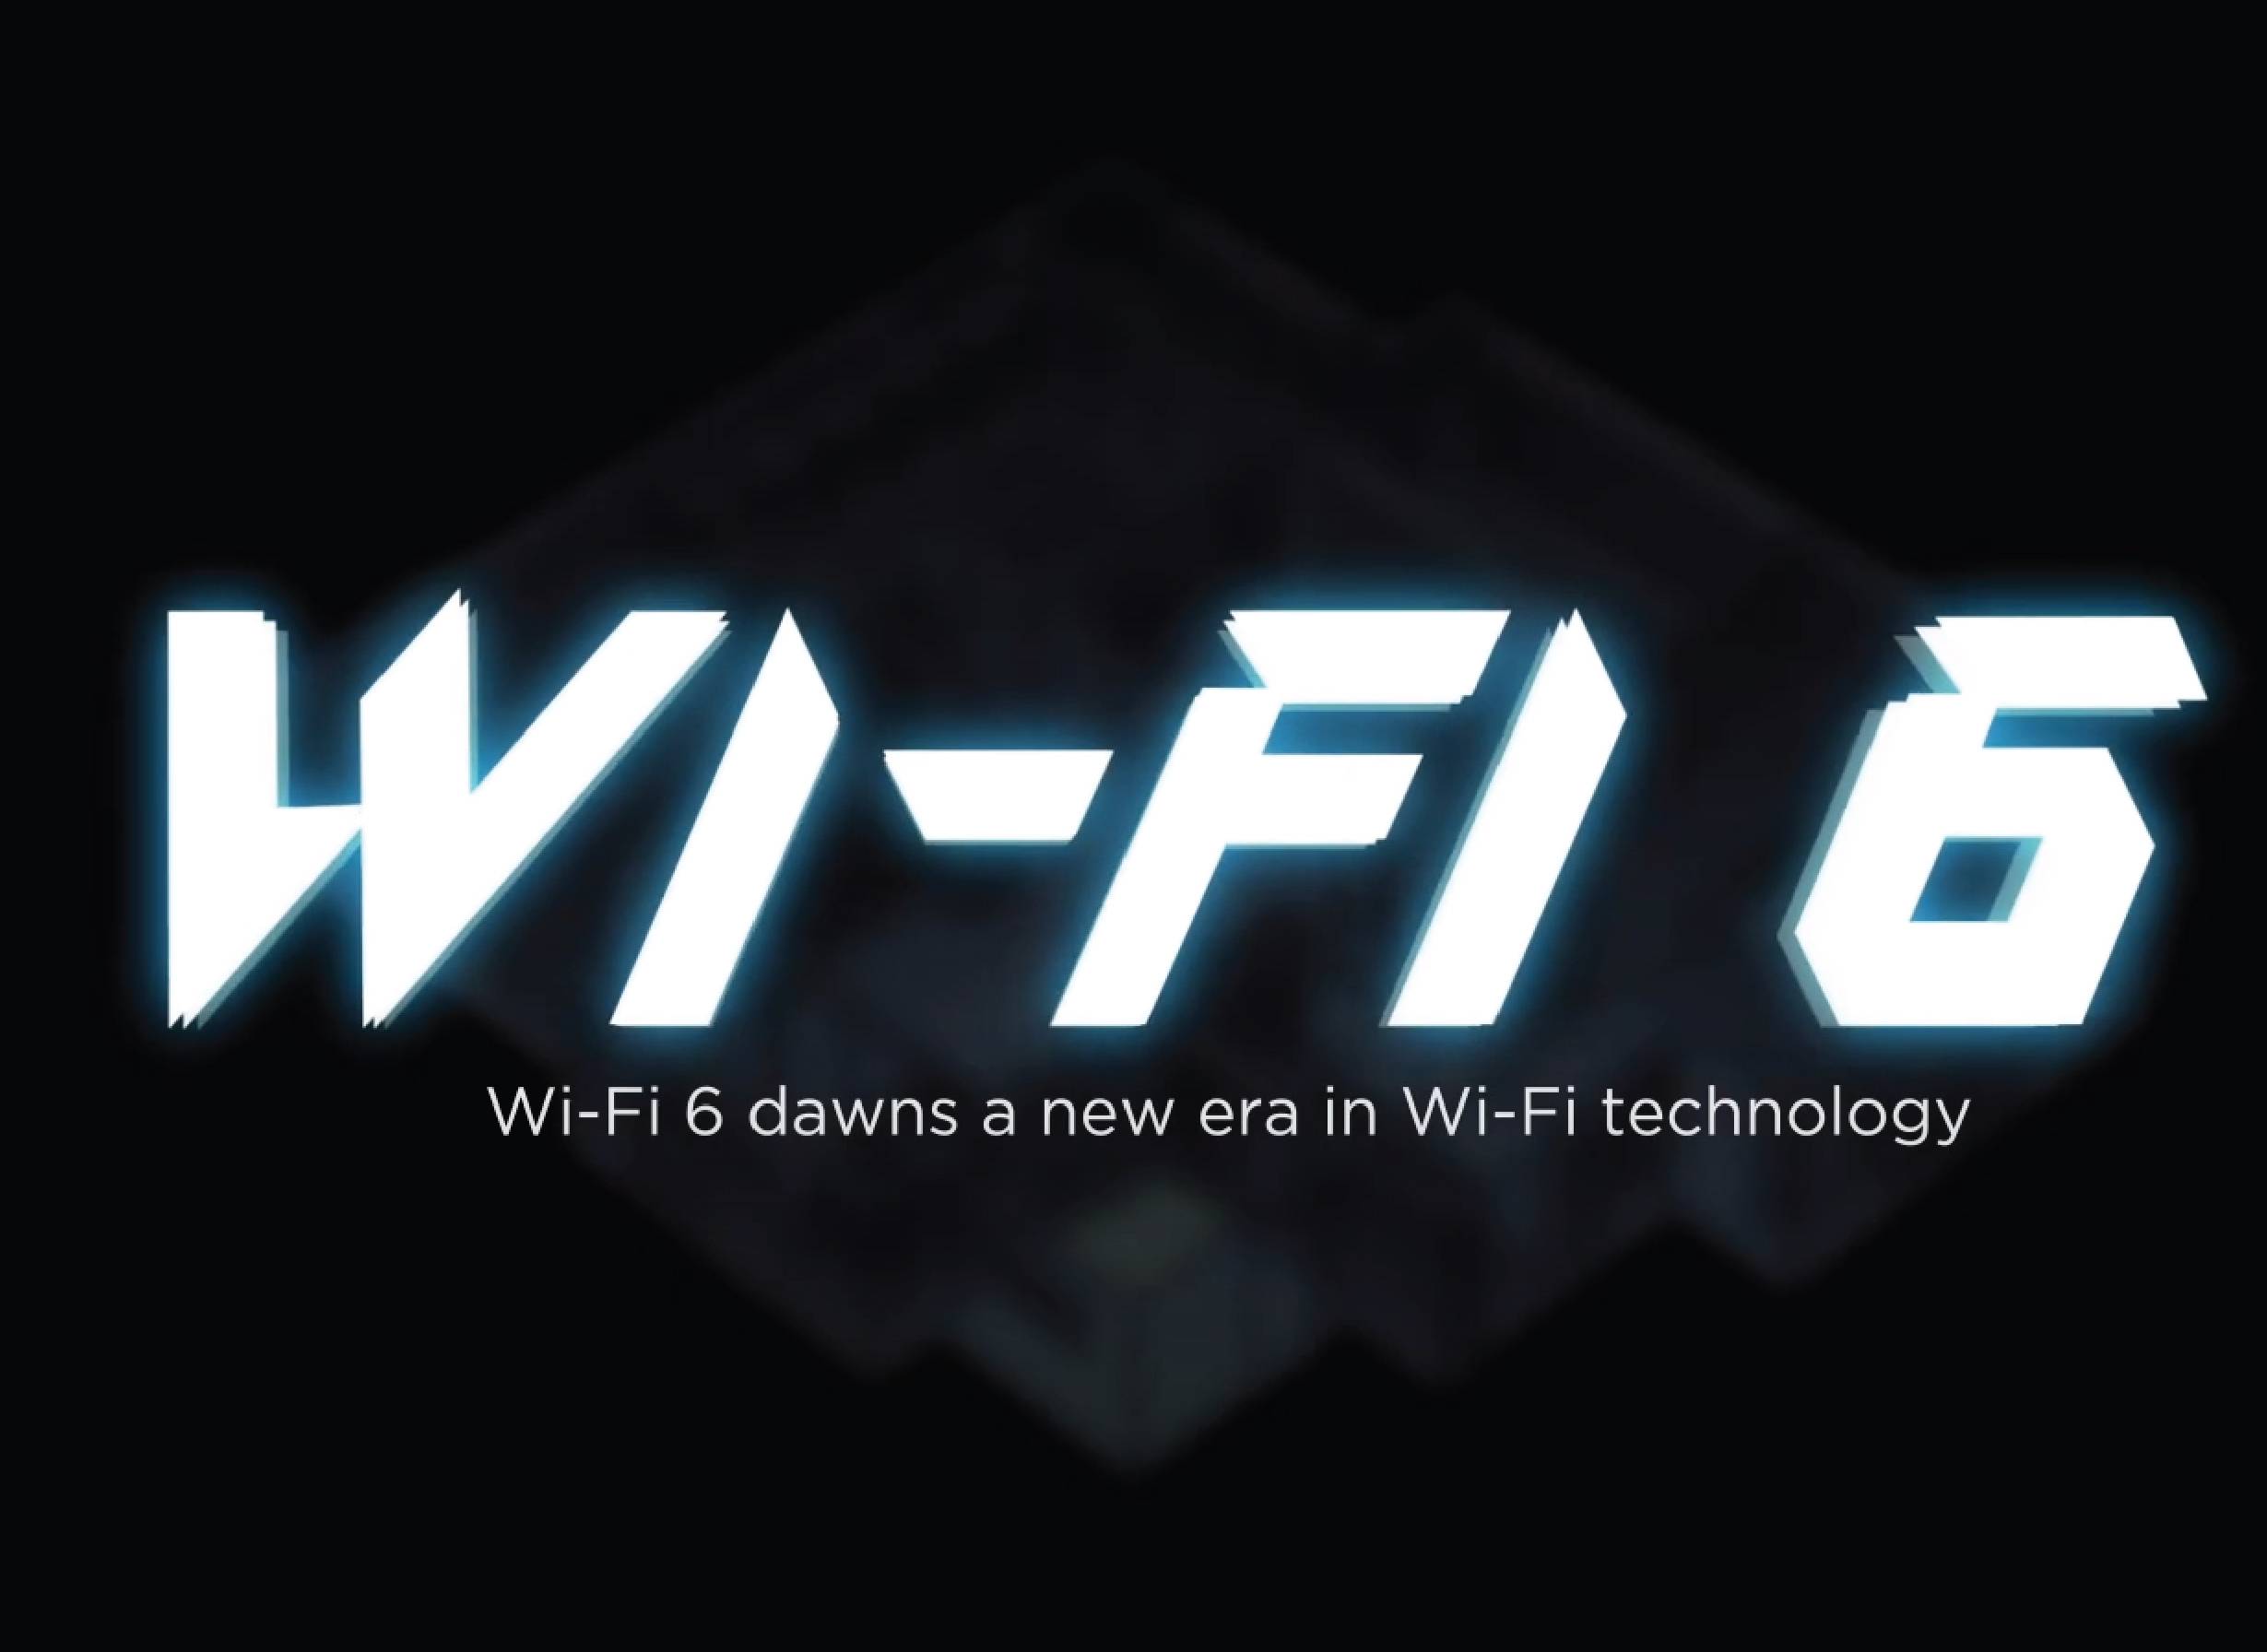 D-Link's Wi-Fi 6 EXO|AX Router Series